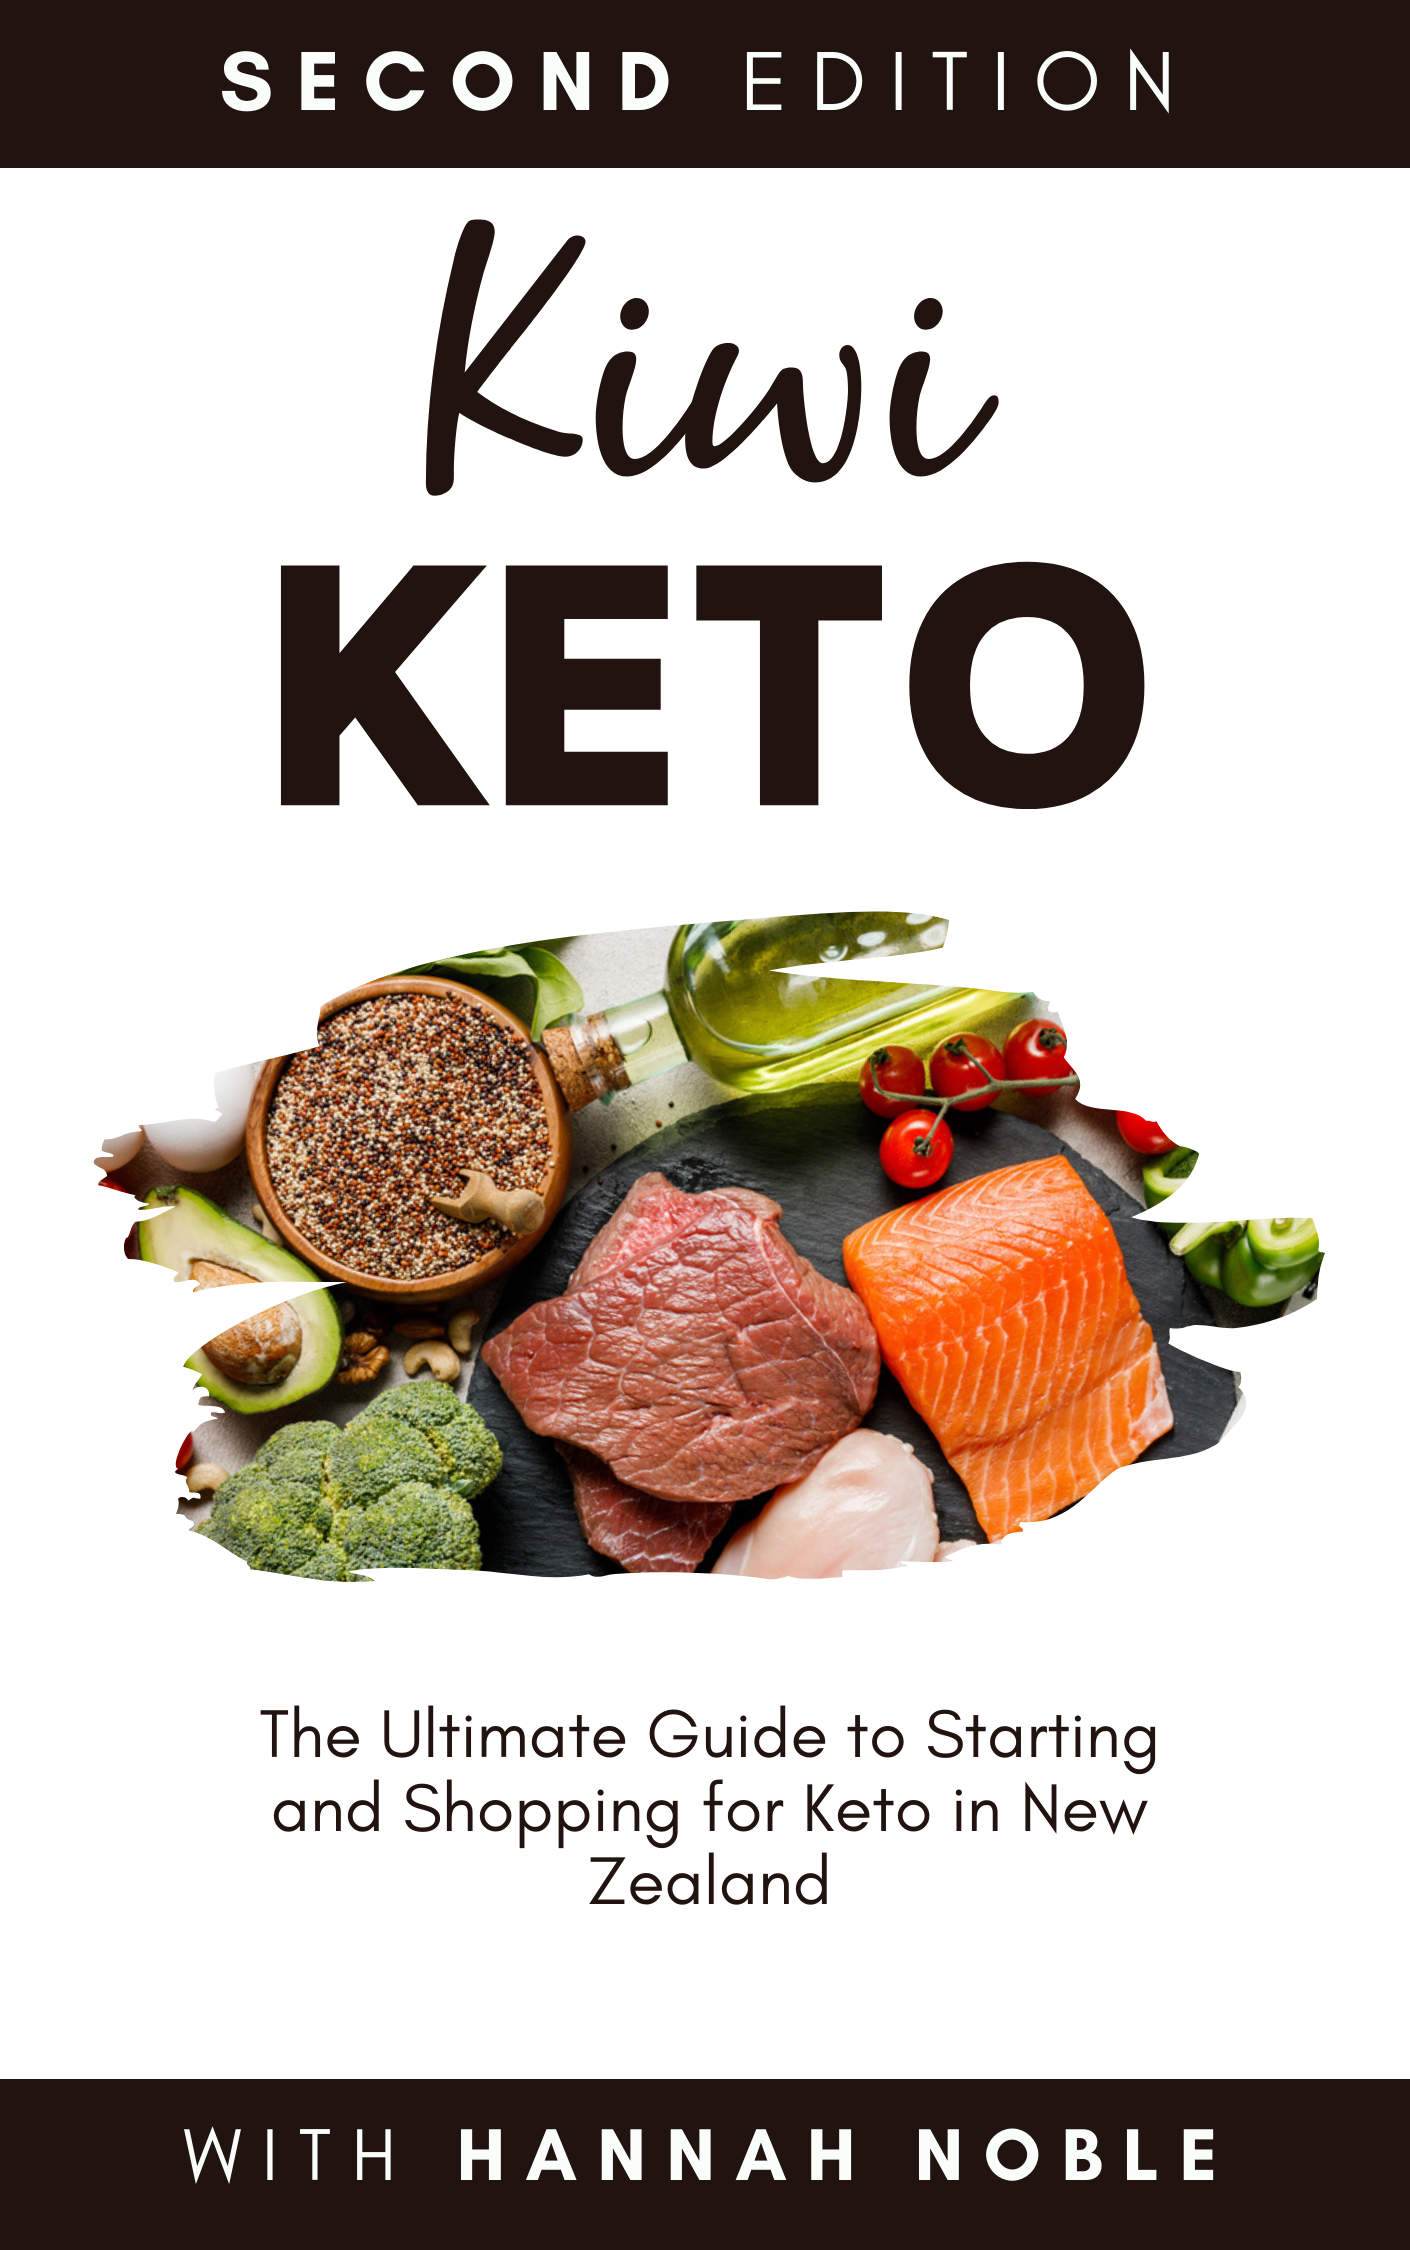 Kiwi Keto: The Ultimate Guide to Starting and Shopping for Keto in New Zealand